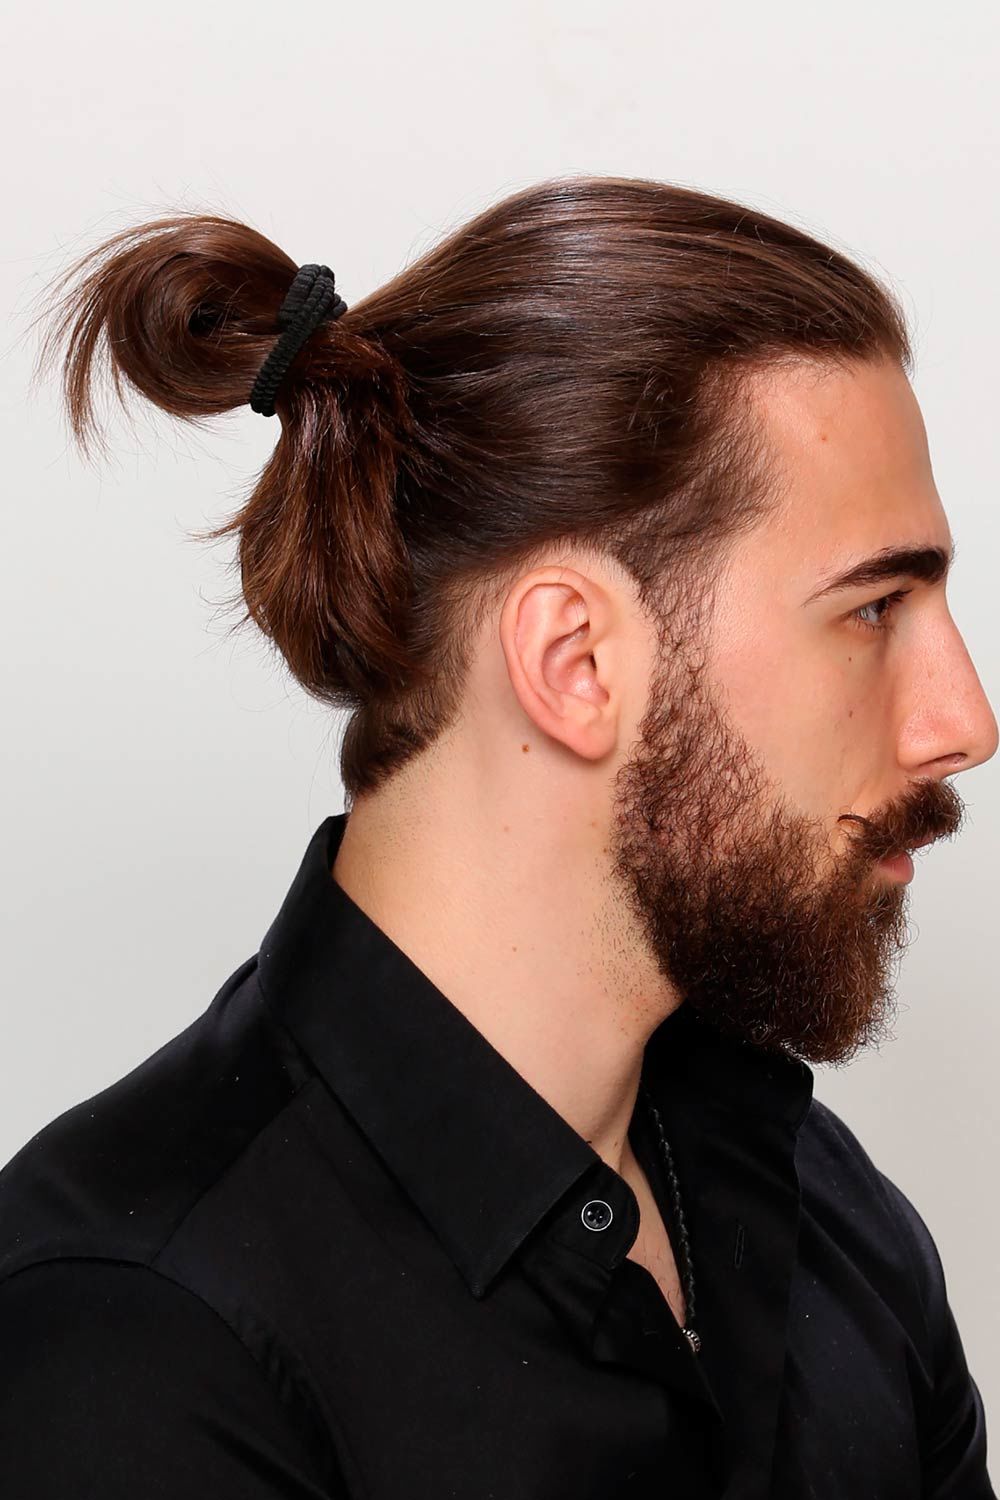 How To Get, Style, And Sport The On-trend Man Bun Hairstyle